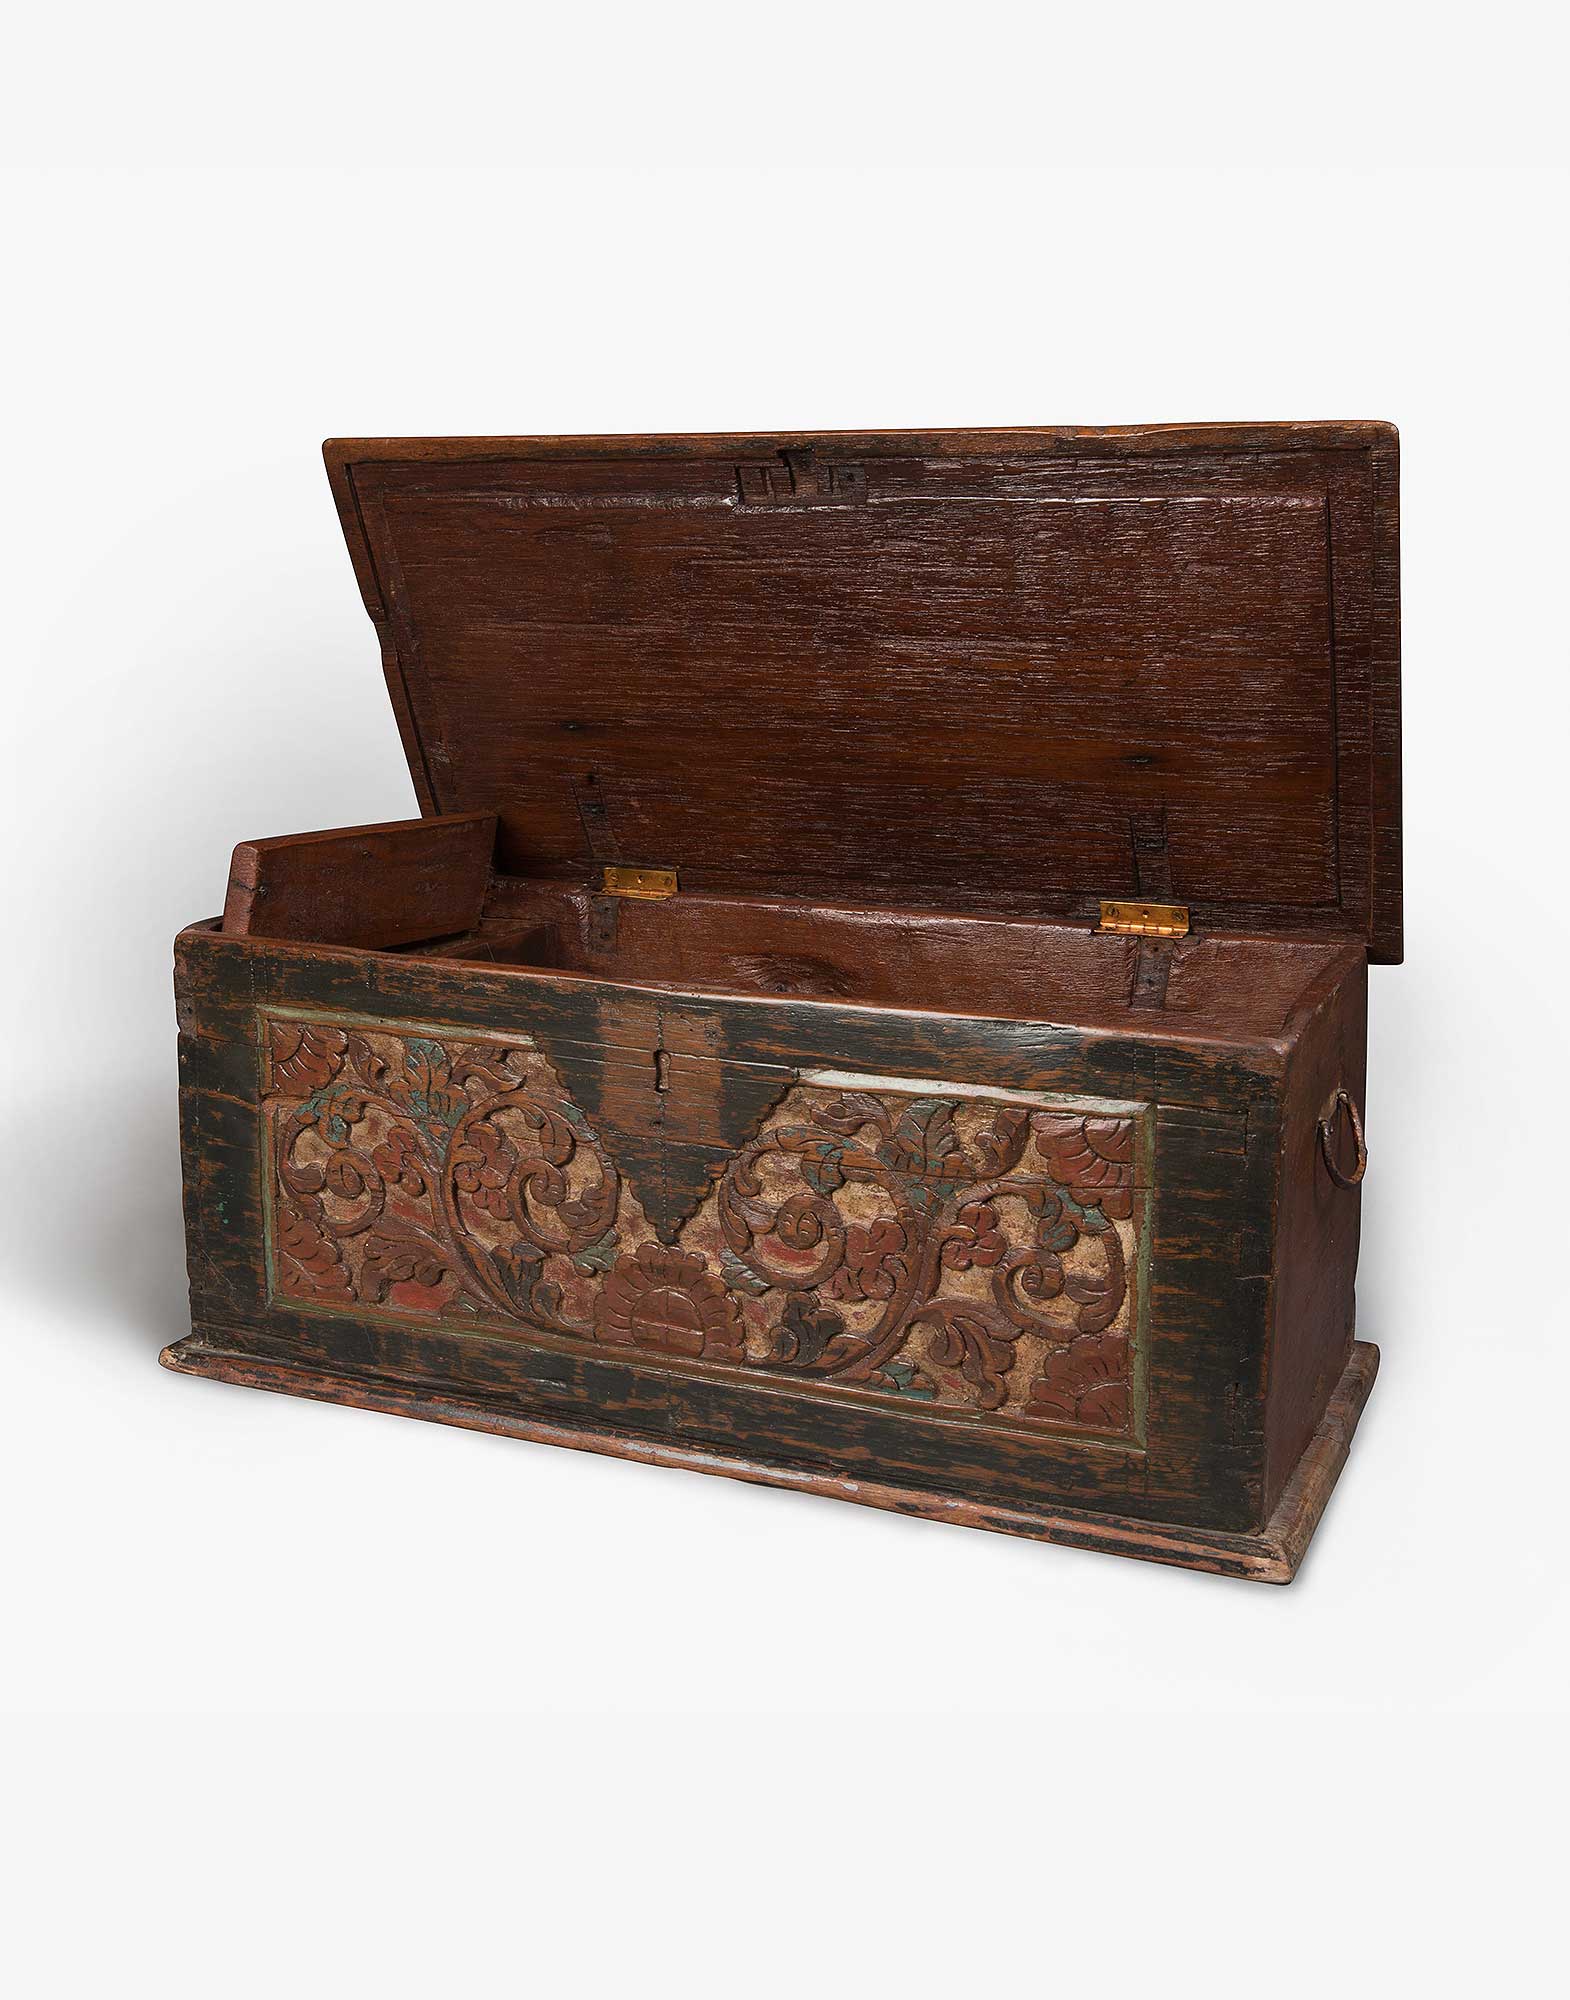 Indonesian Antique Wooden Chest